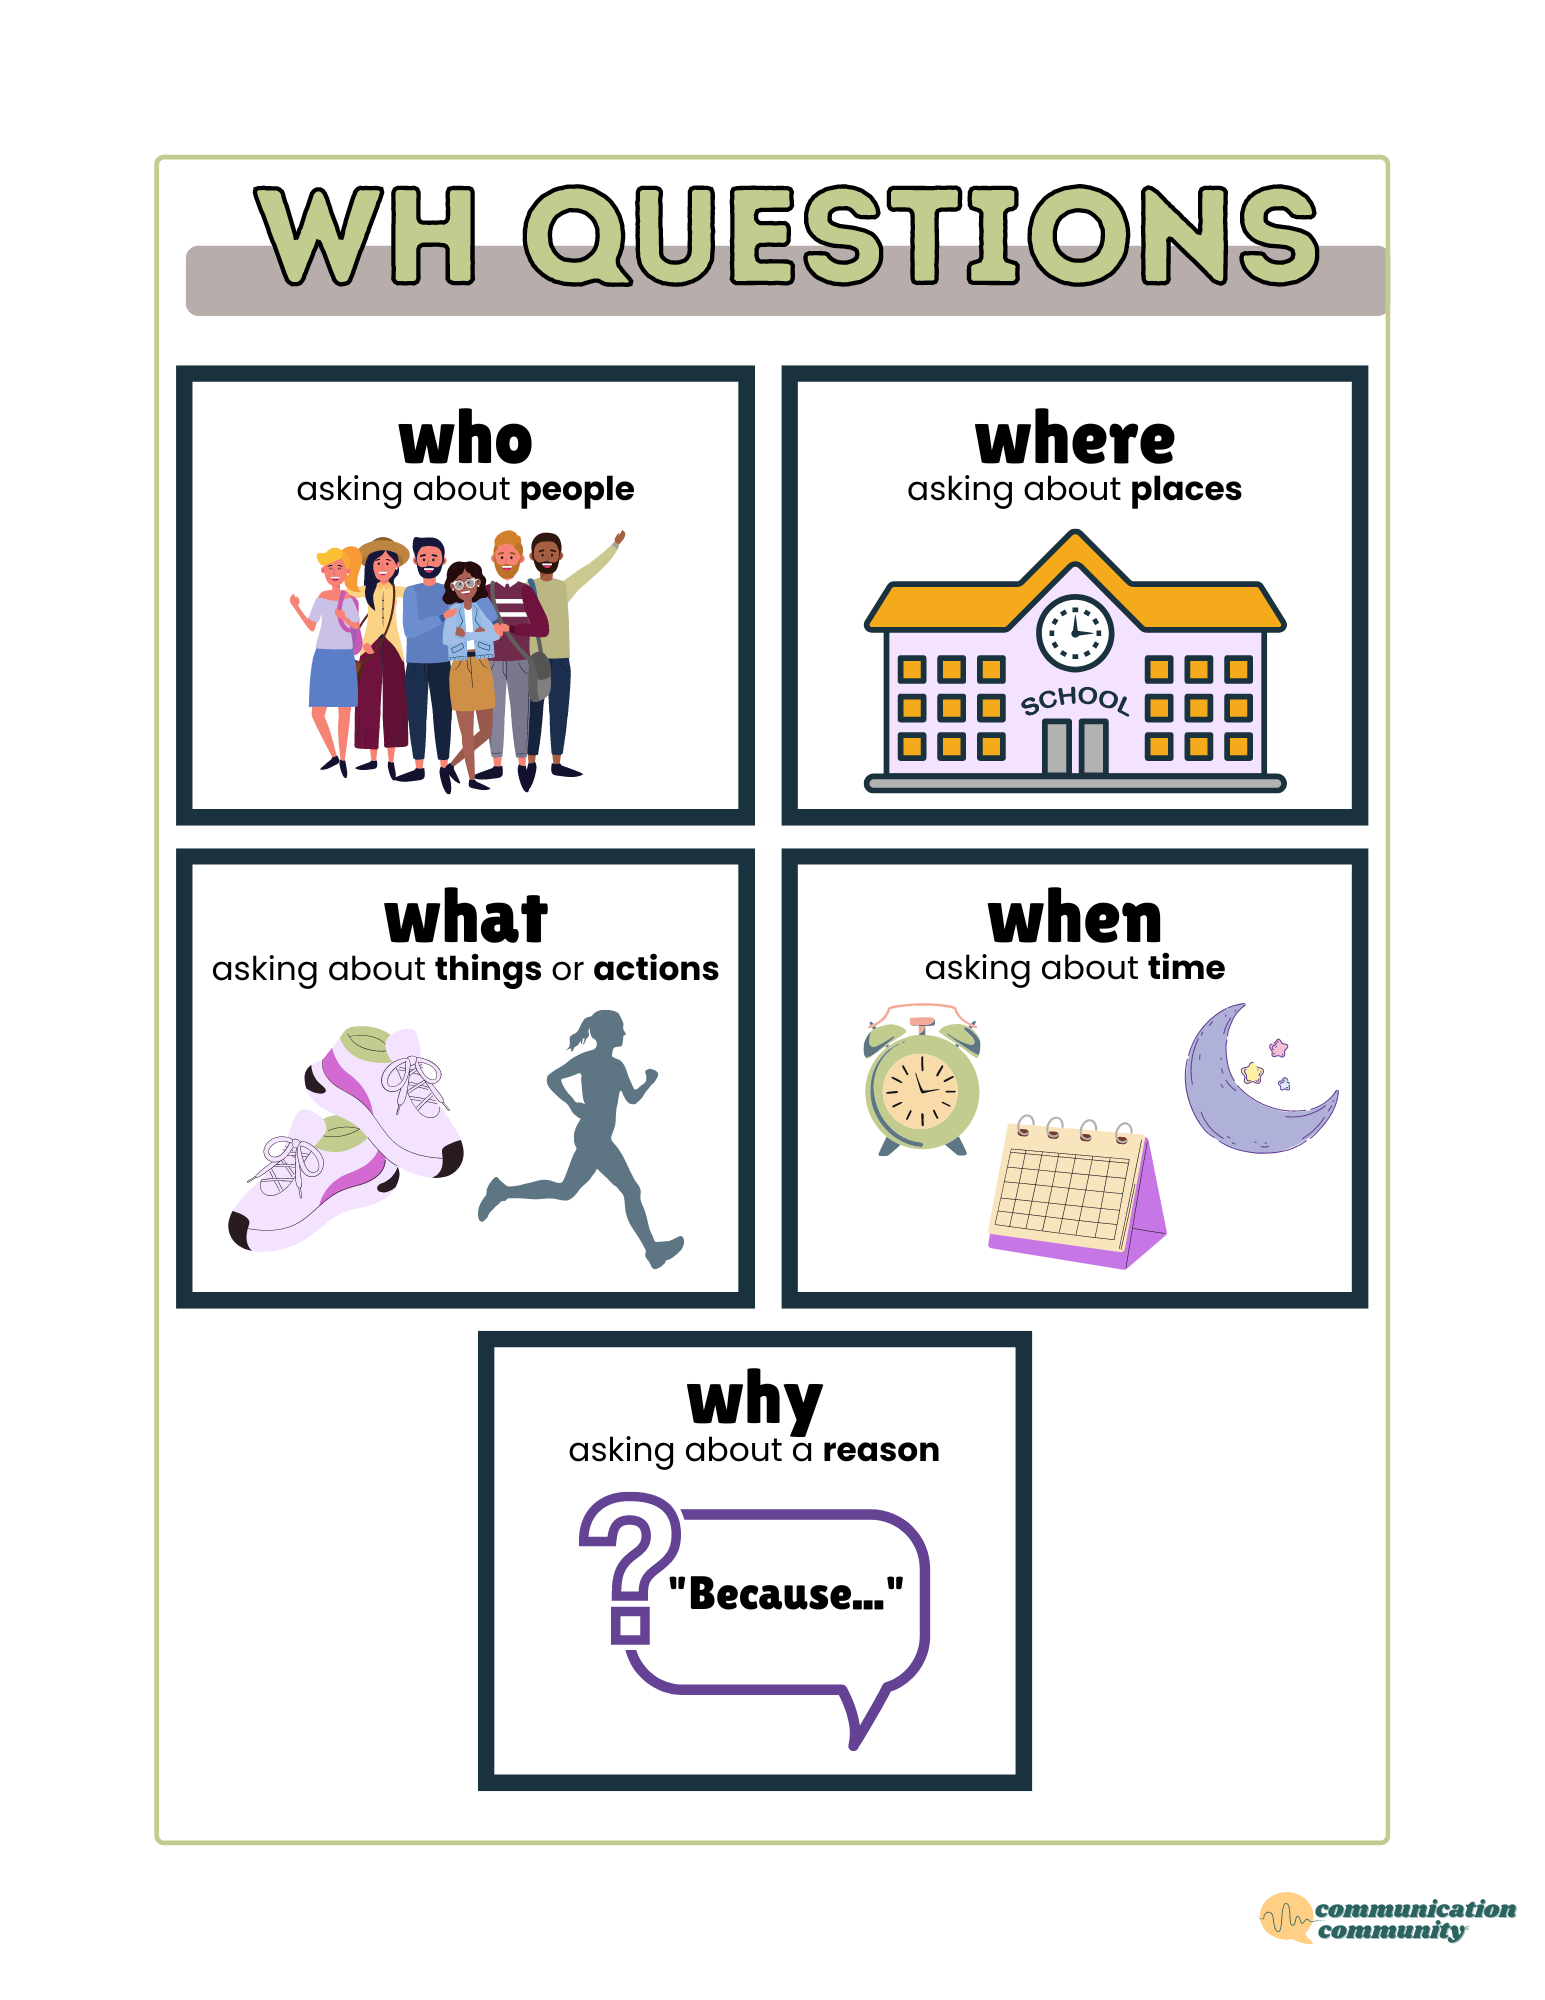 higher order thinking questions speech therapy